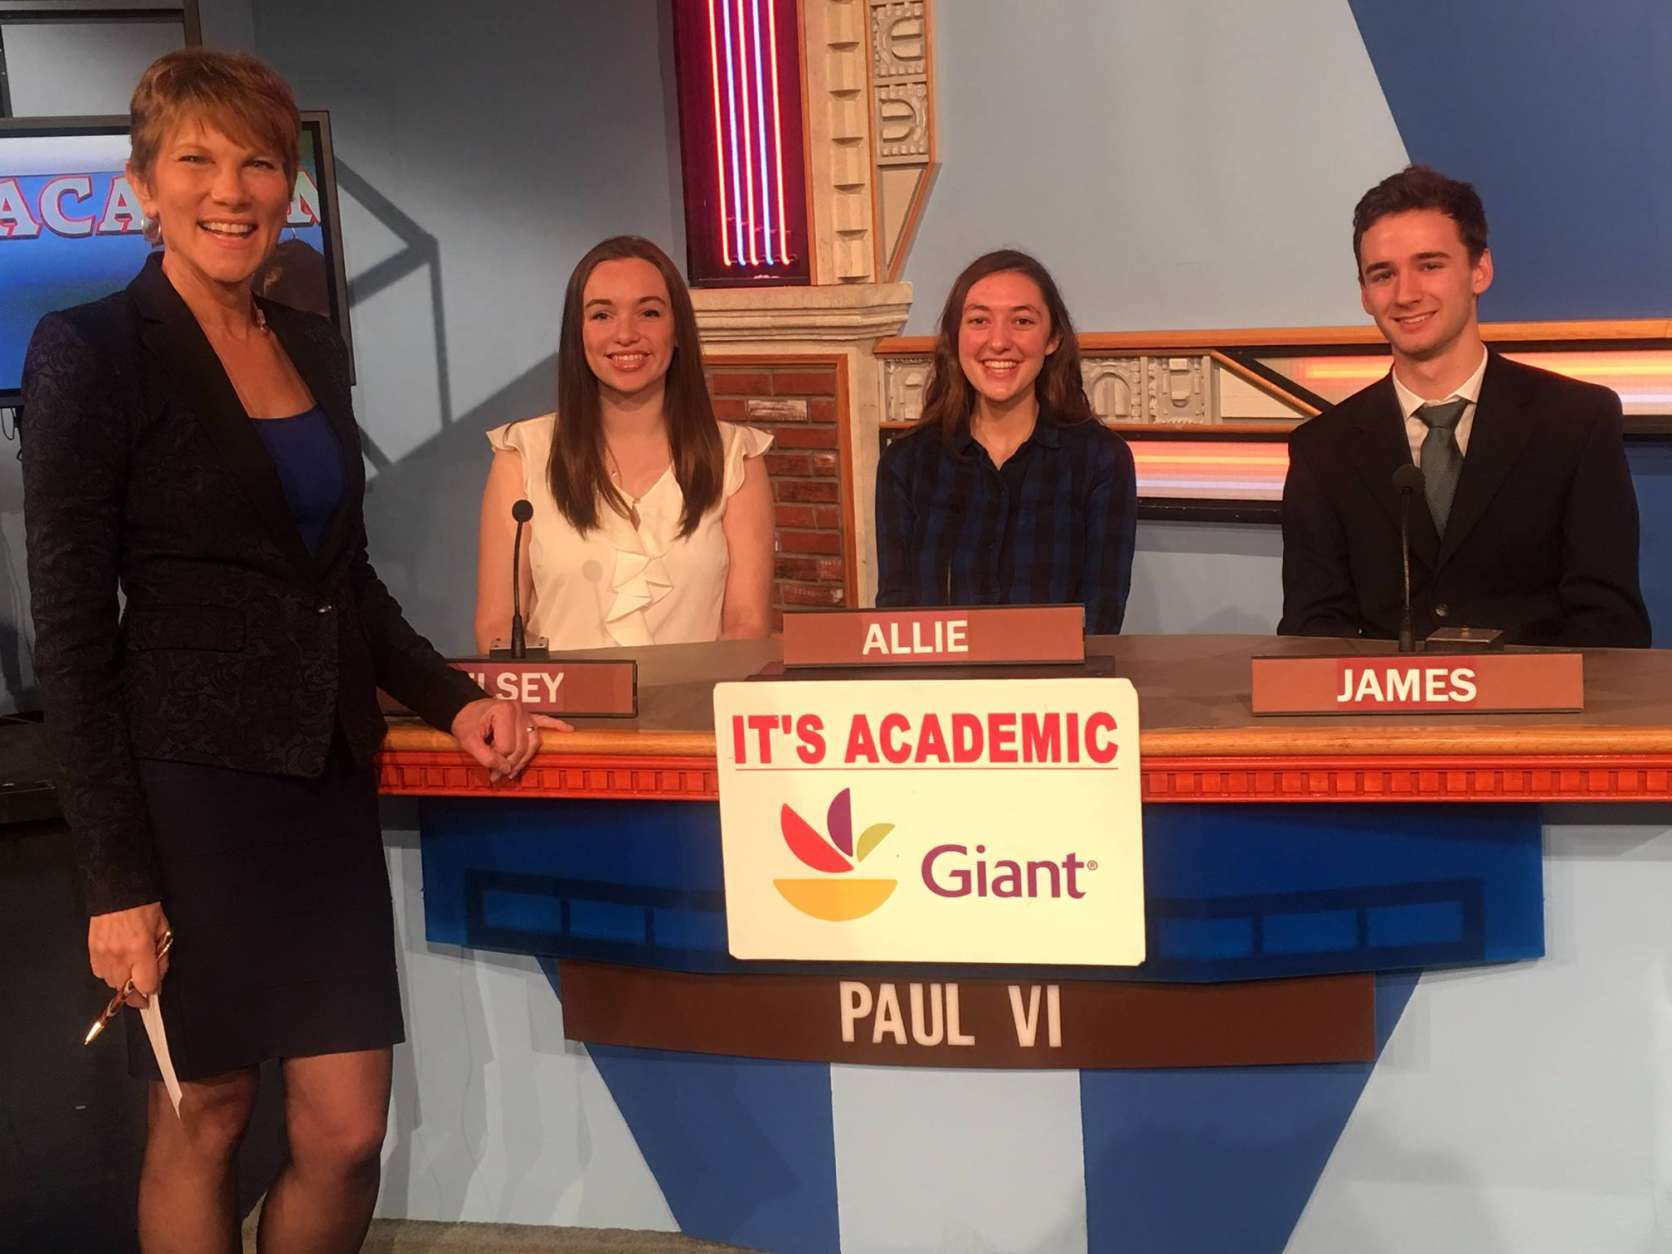 On "It's Academic," Paul VI competed against Albert Einstein High School and Holton-Arms. The show aired Jan. 28, 2017. (Courtesy Facebook/It's Academic)